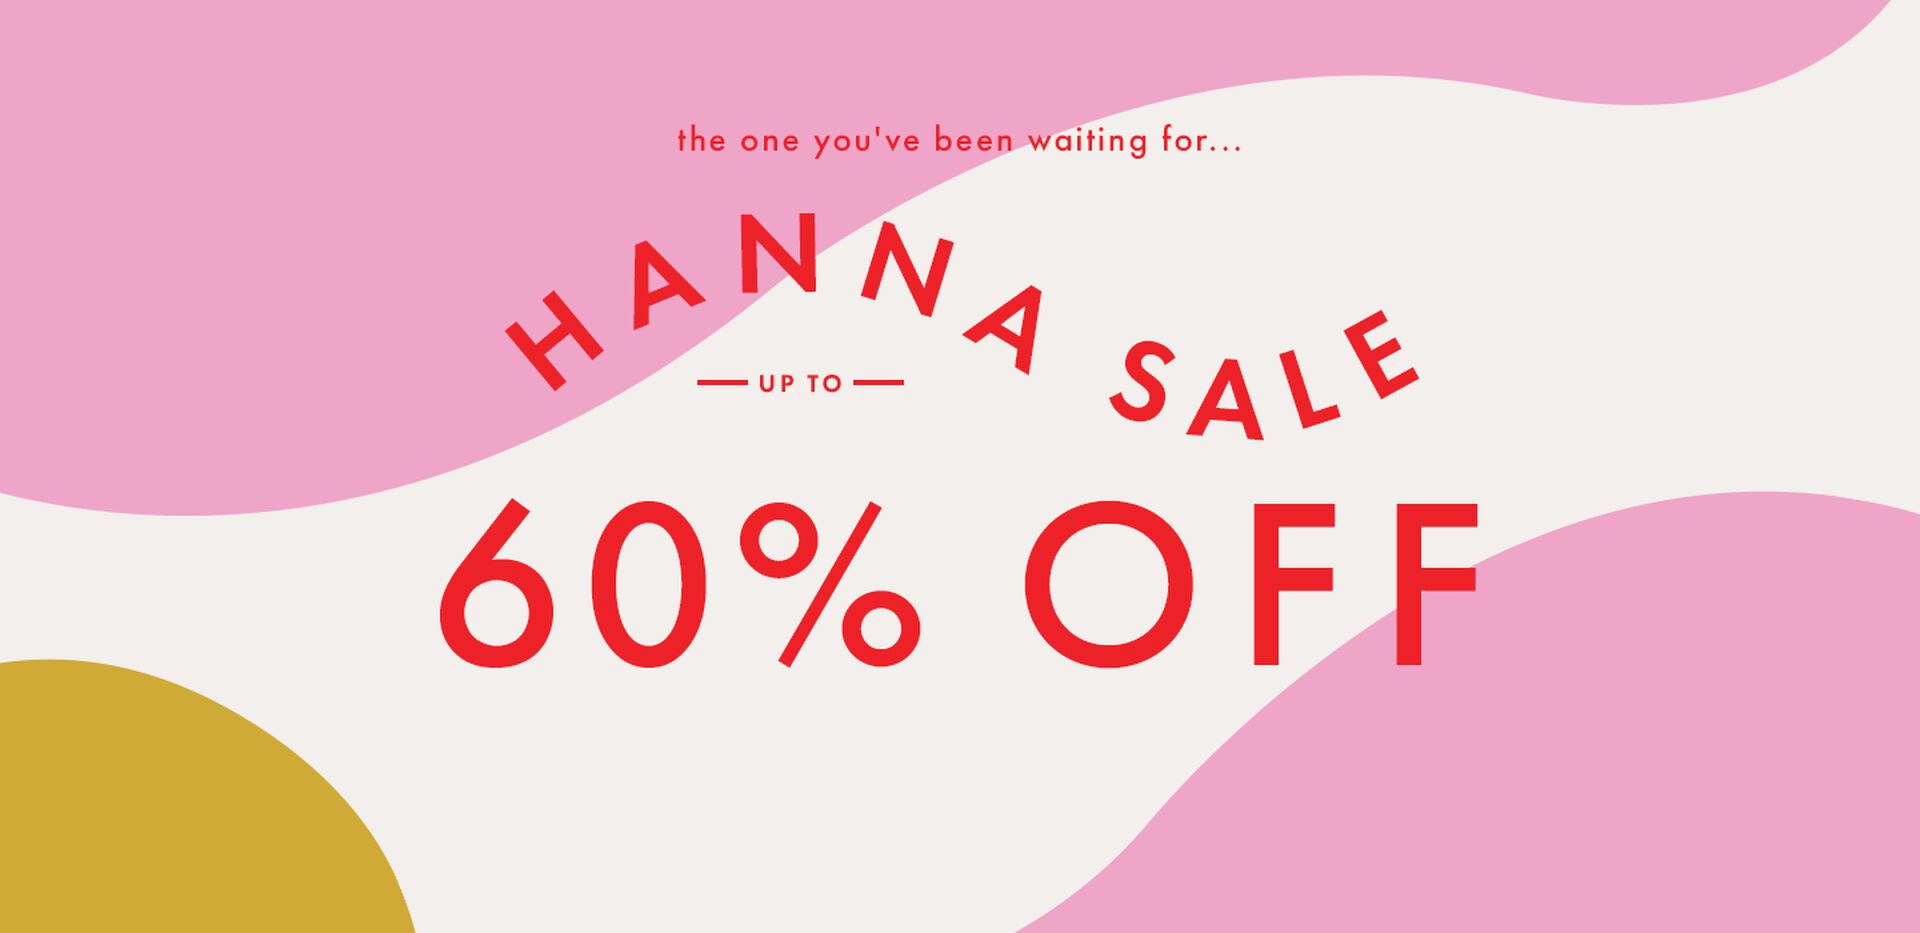 Hanna Sale Up to 60% off